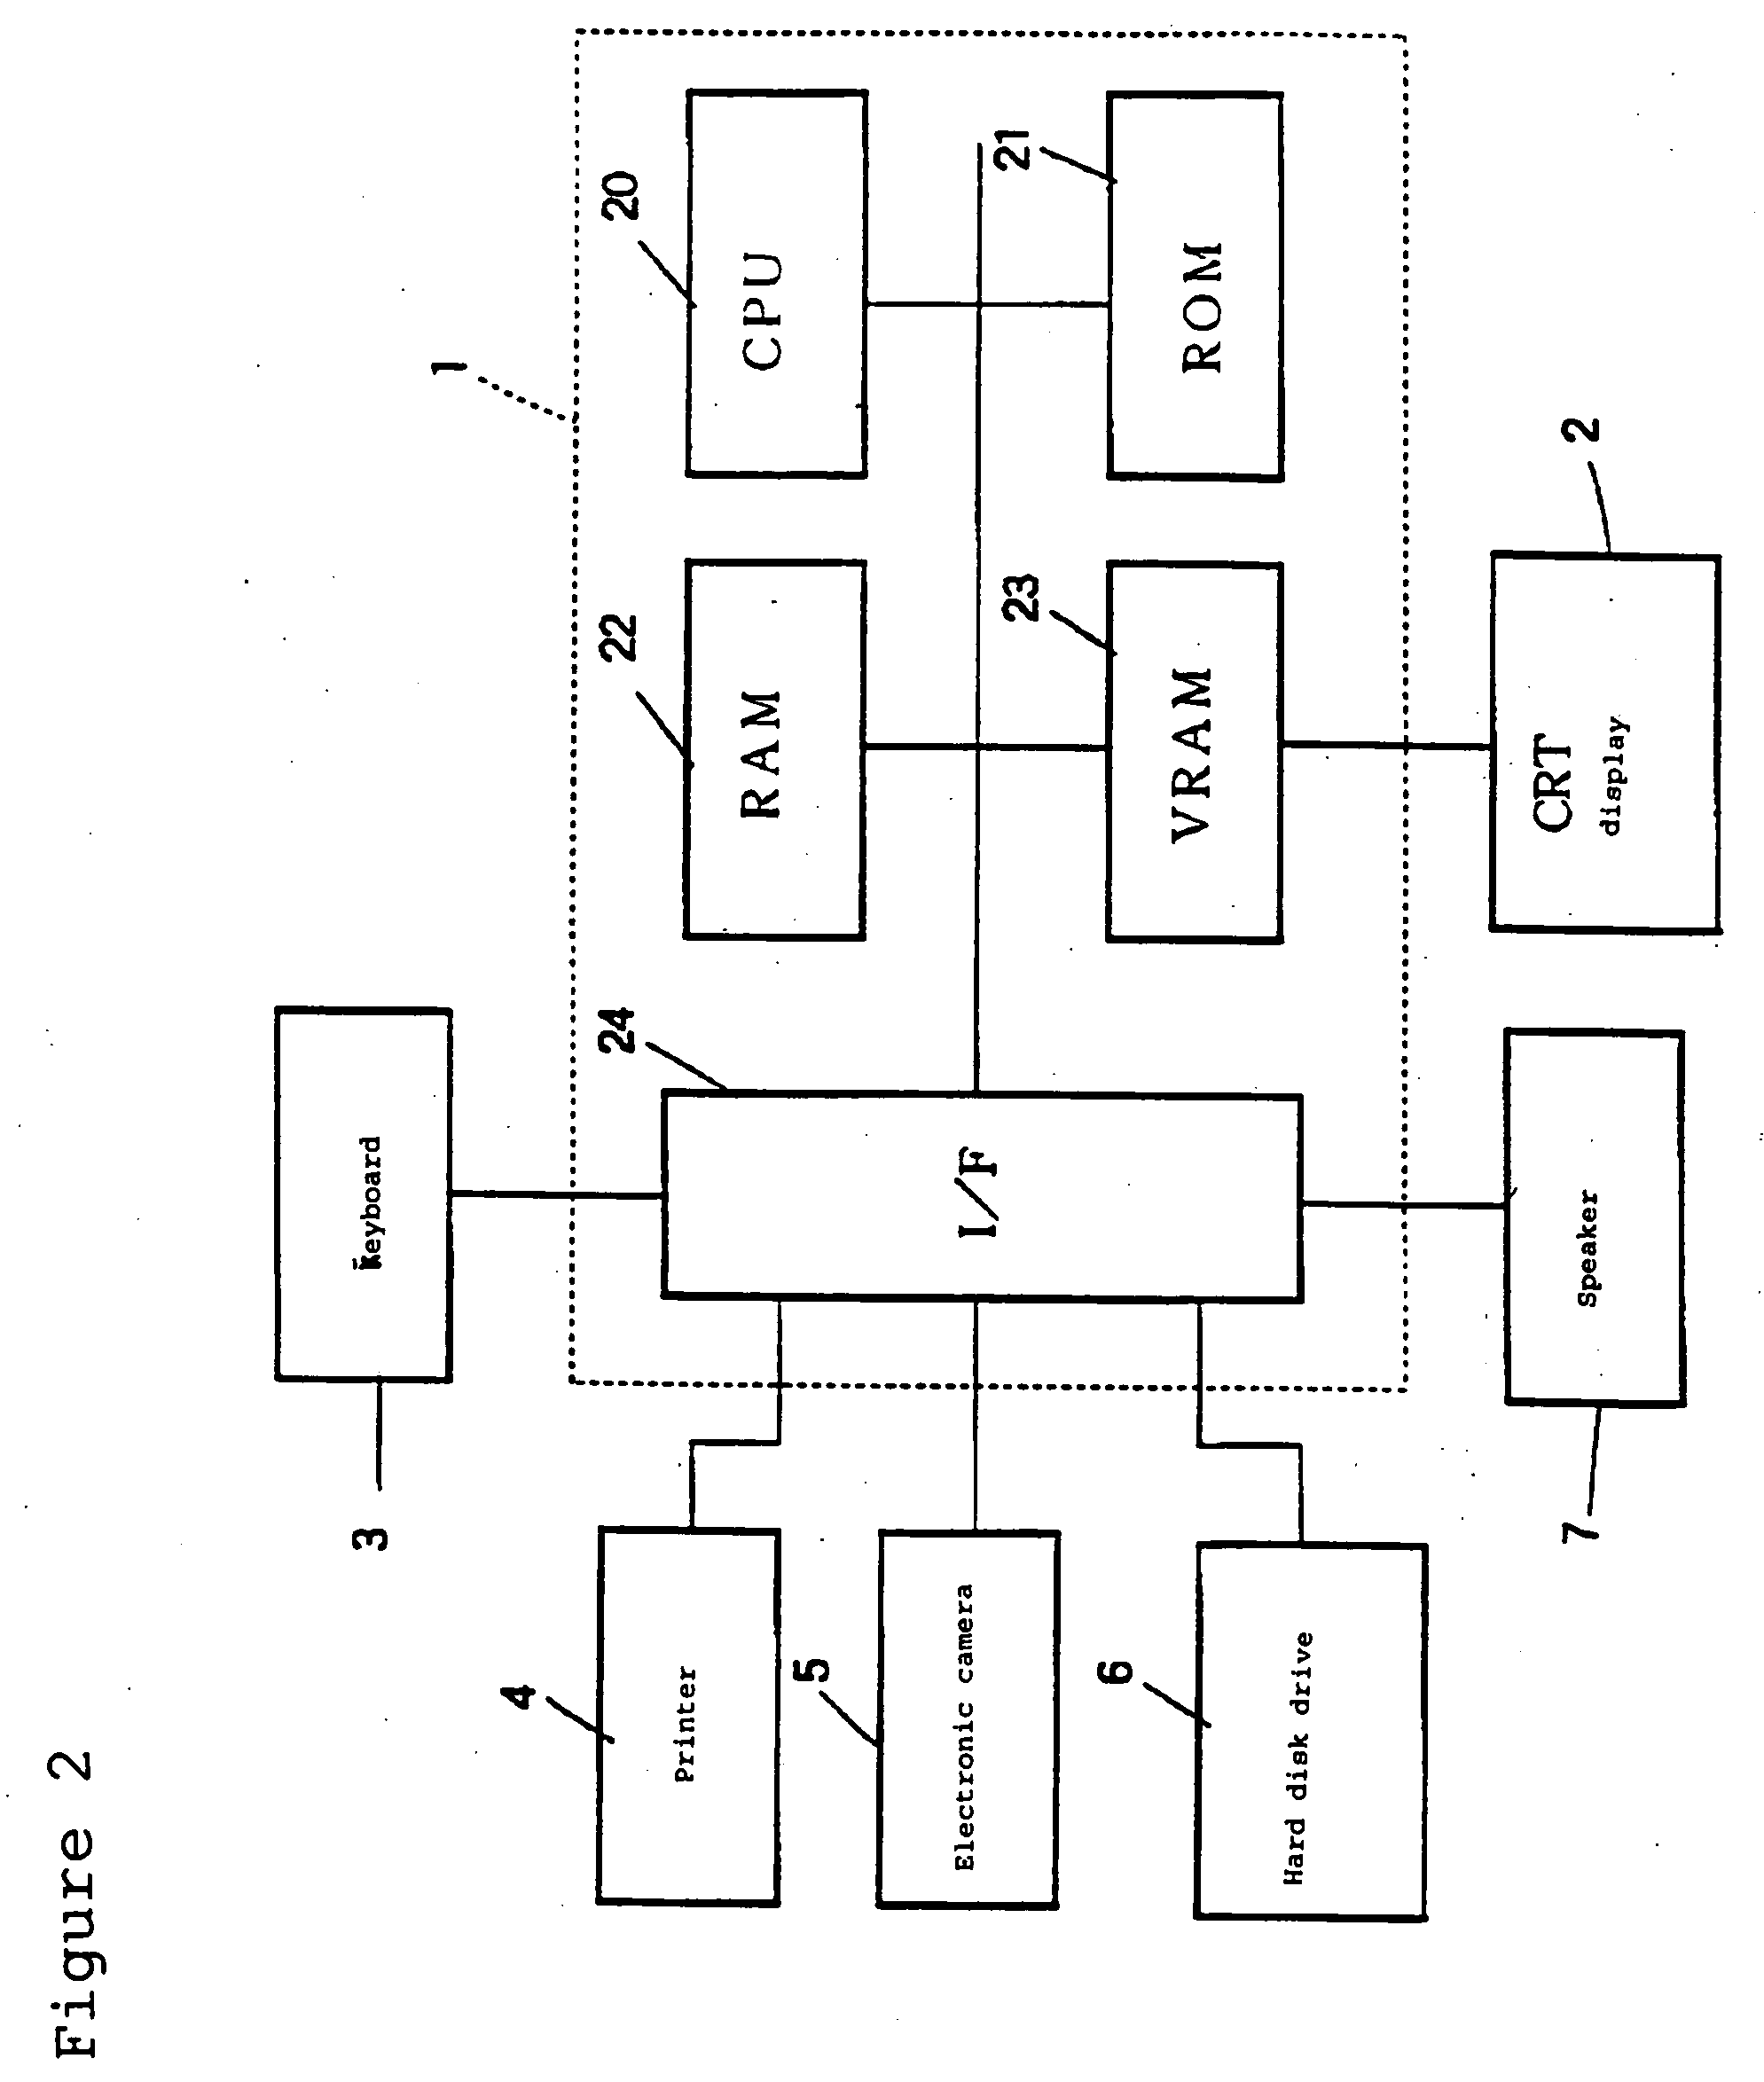 Information processing apparatus, information processing method and recording medium for electronic equipment including an electronic camera